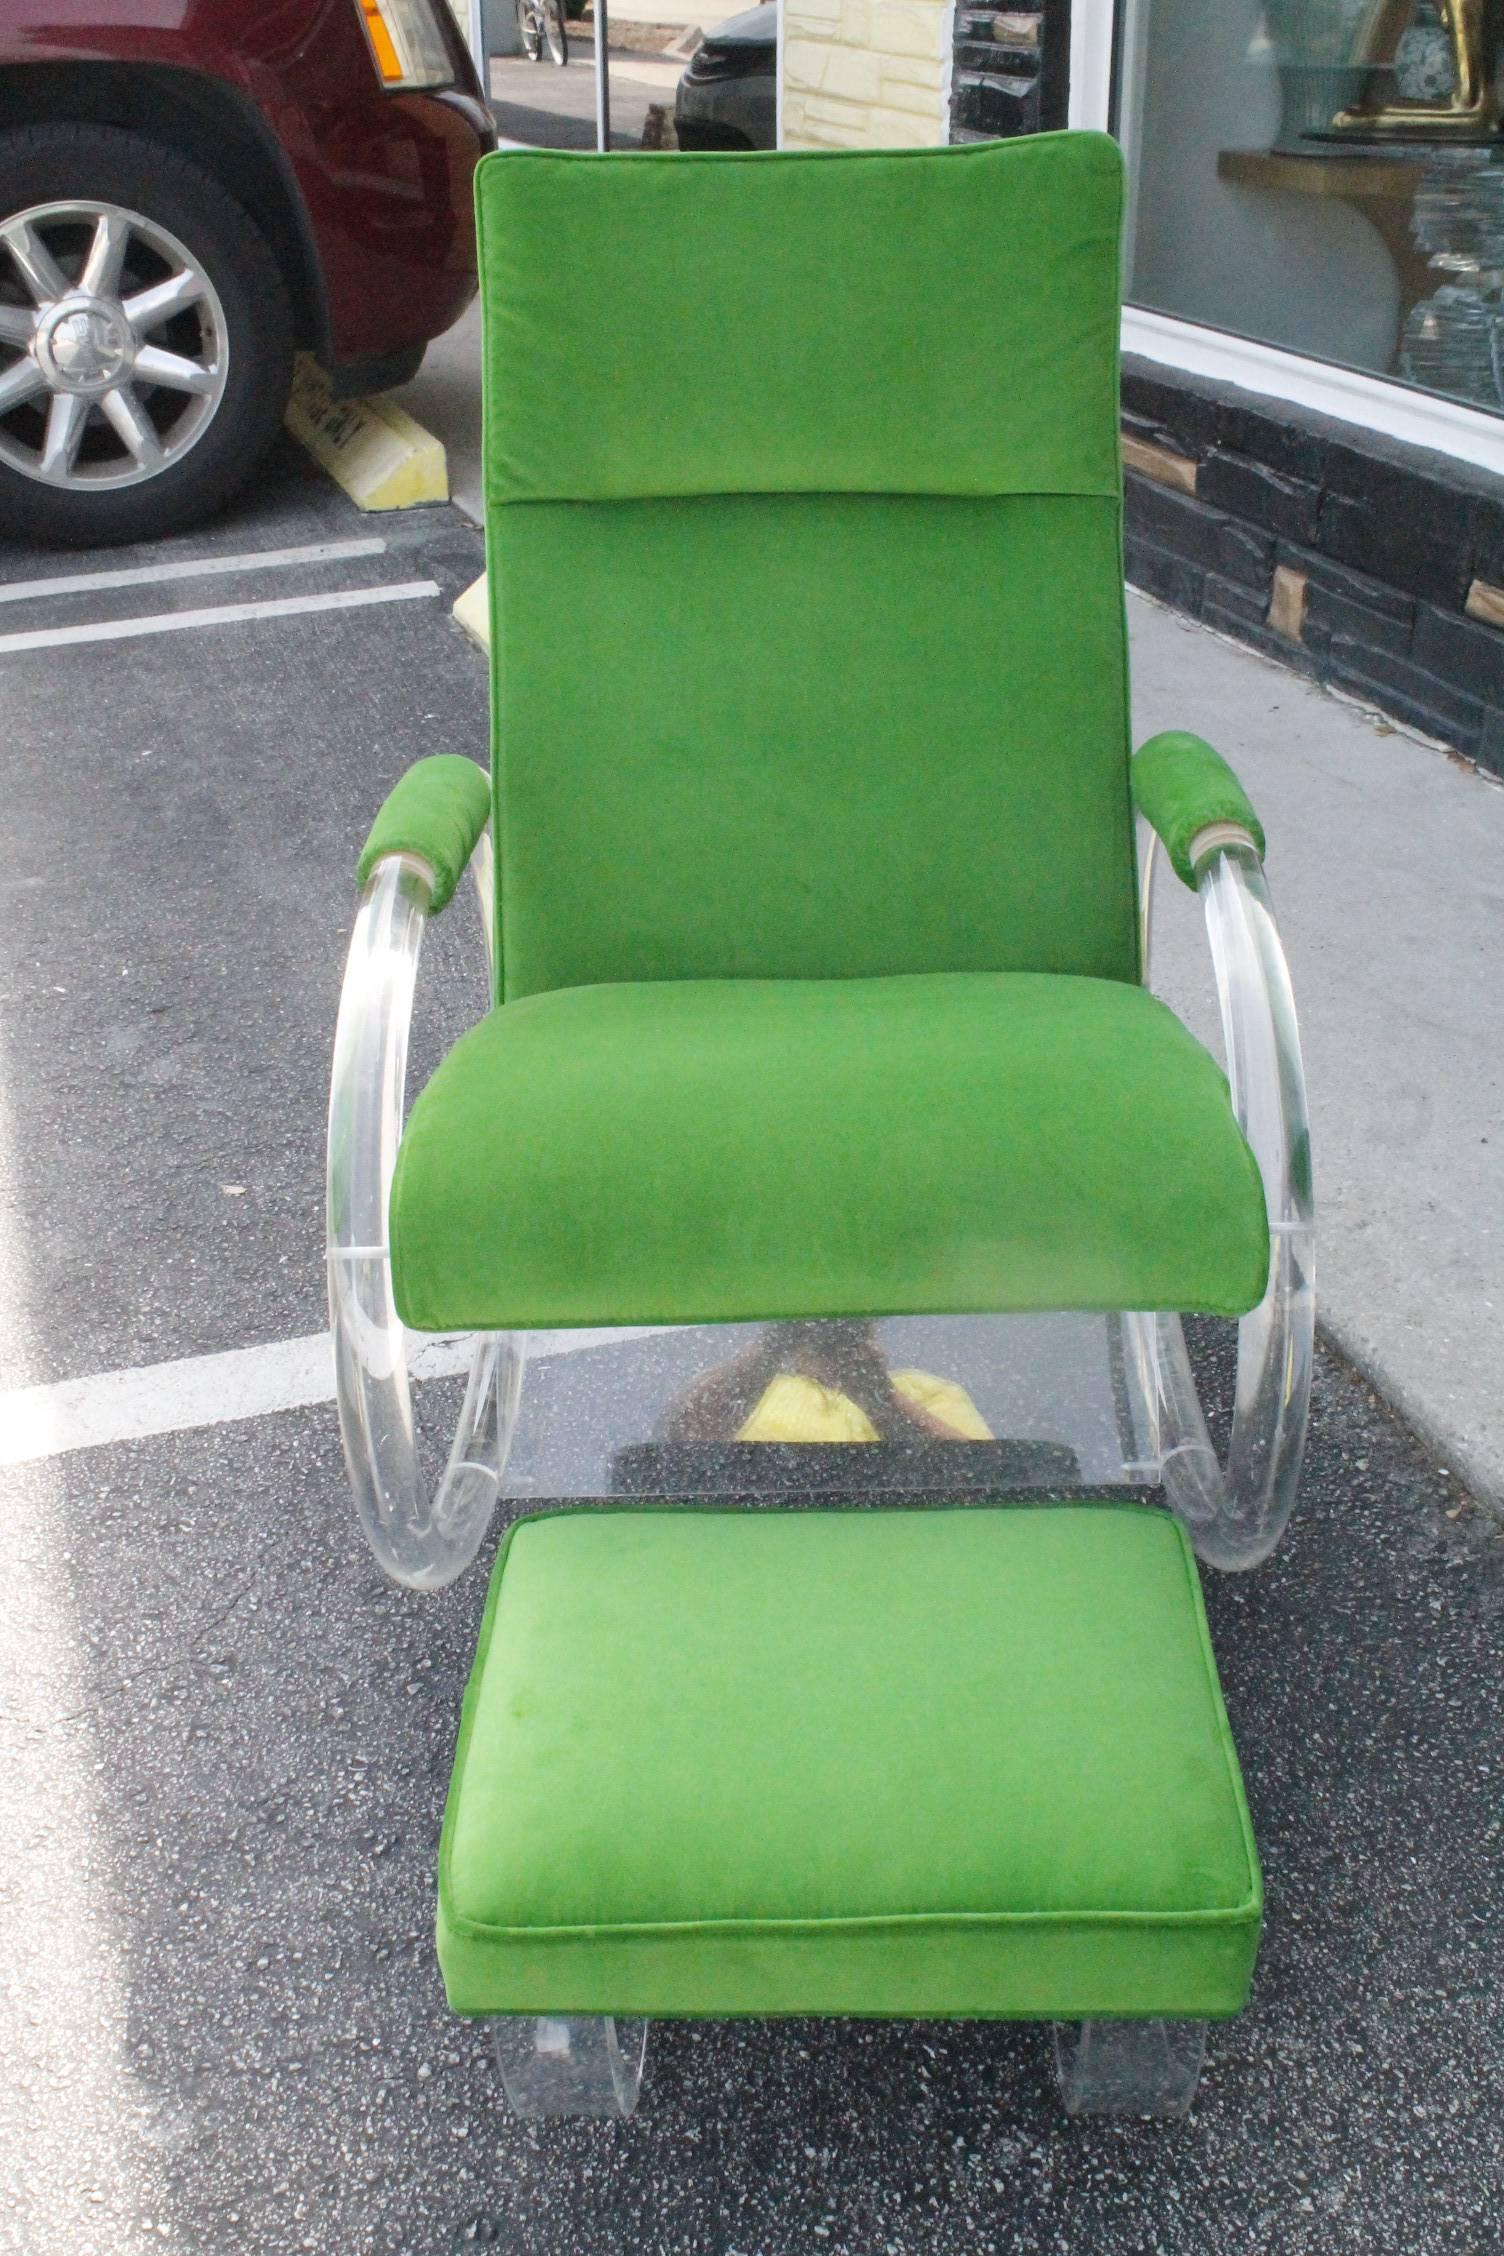 Amazing Vintage Hollywood Palm Beach Regency, Charles Hollis Jones CHJ by Hill Mfg. Lucite rocking chair and matching foot stool, ottoman newly upholstered in a bright green velvet. Perfect in a childs room, nursery, living room, etc. 

Footstool